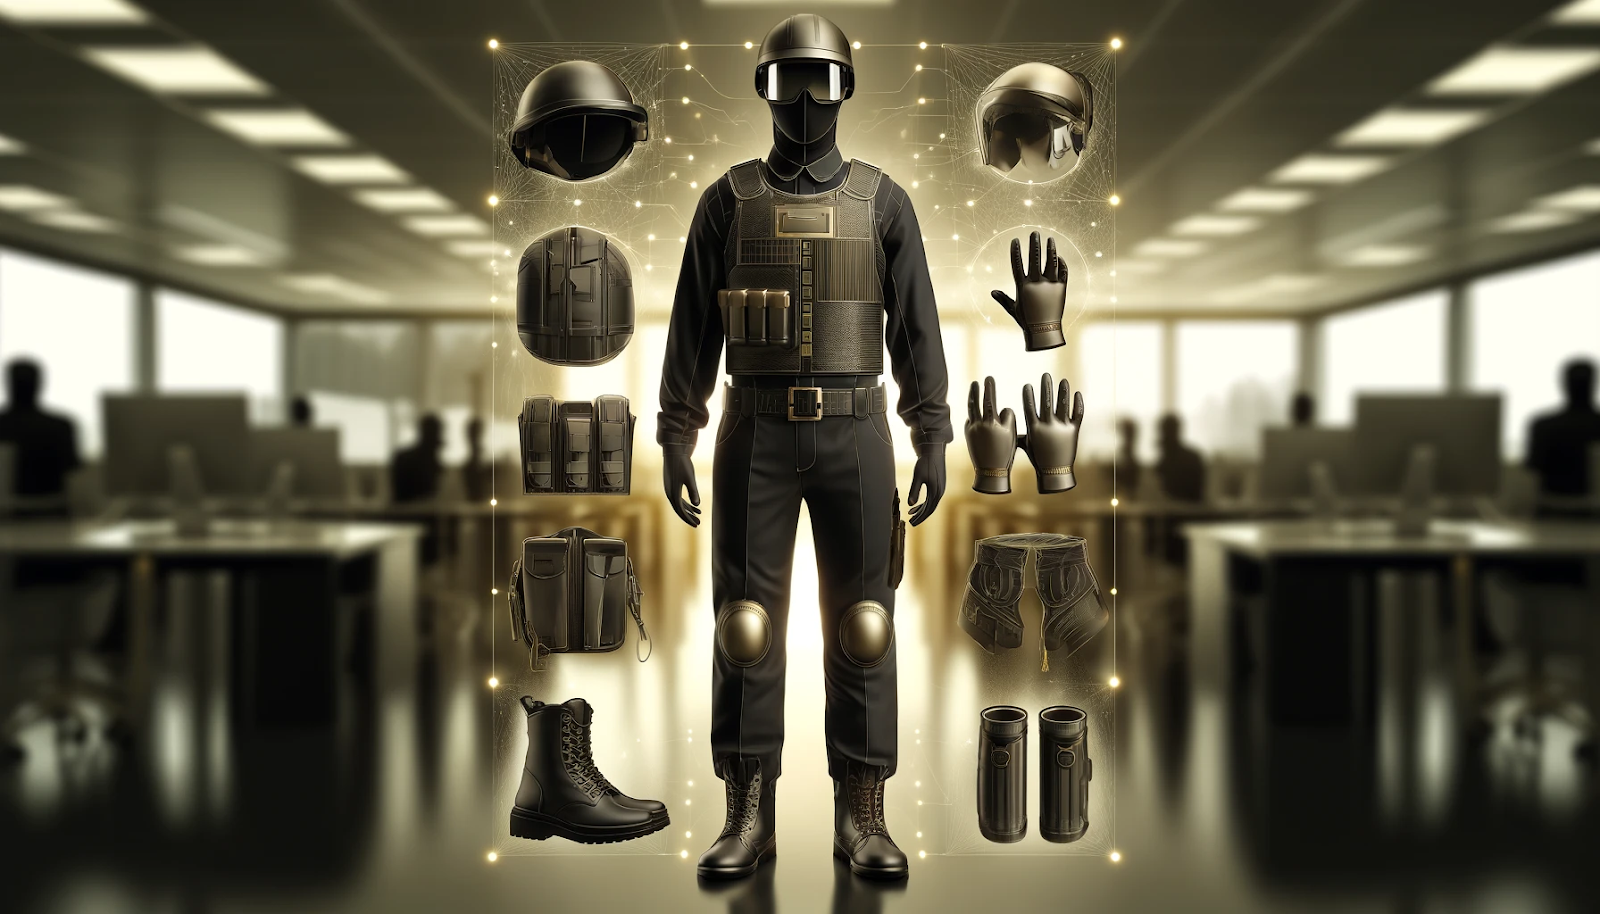 A symbolic representation of Personal Protective Equipment (PPE) for security guards, featuring black and gold colors, illustrating essential safety gear such as helmets, body armor, and safety boots